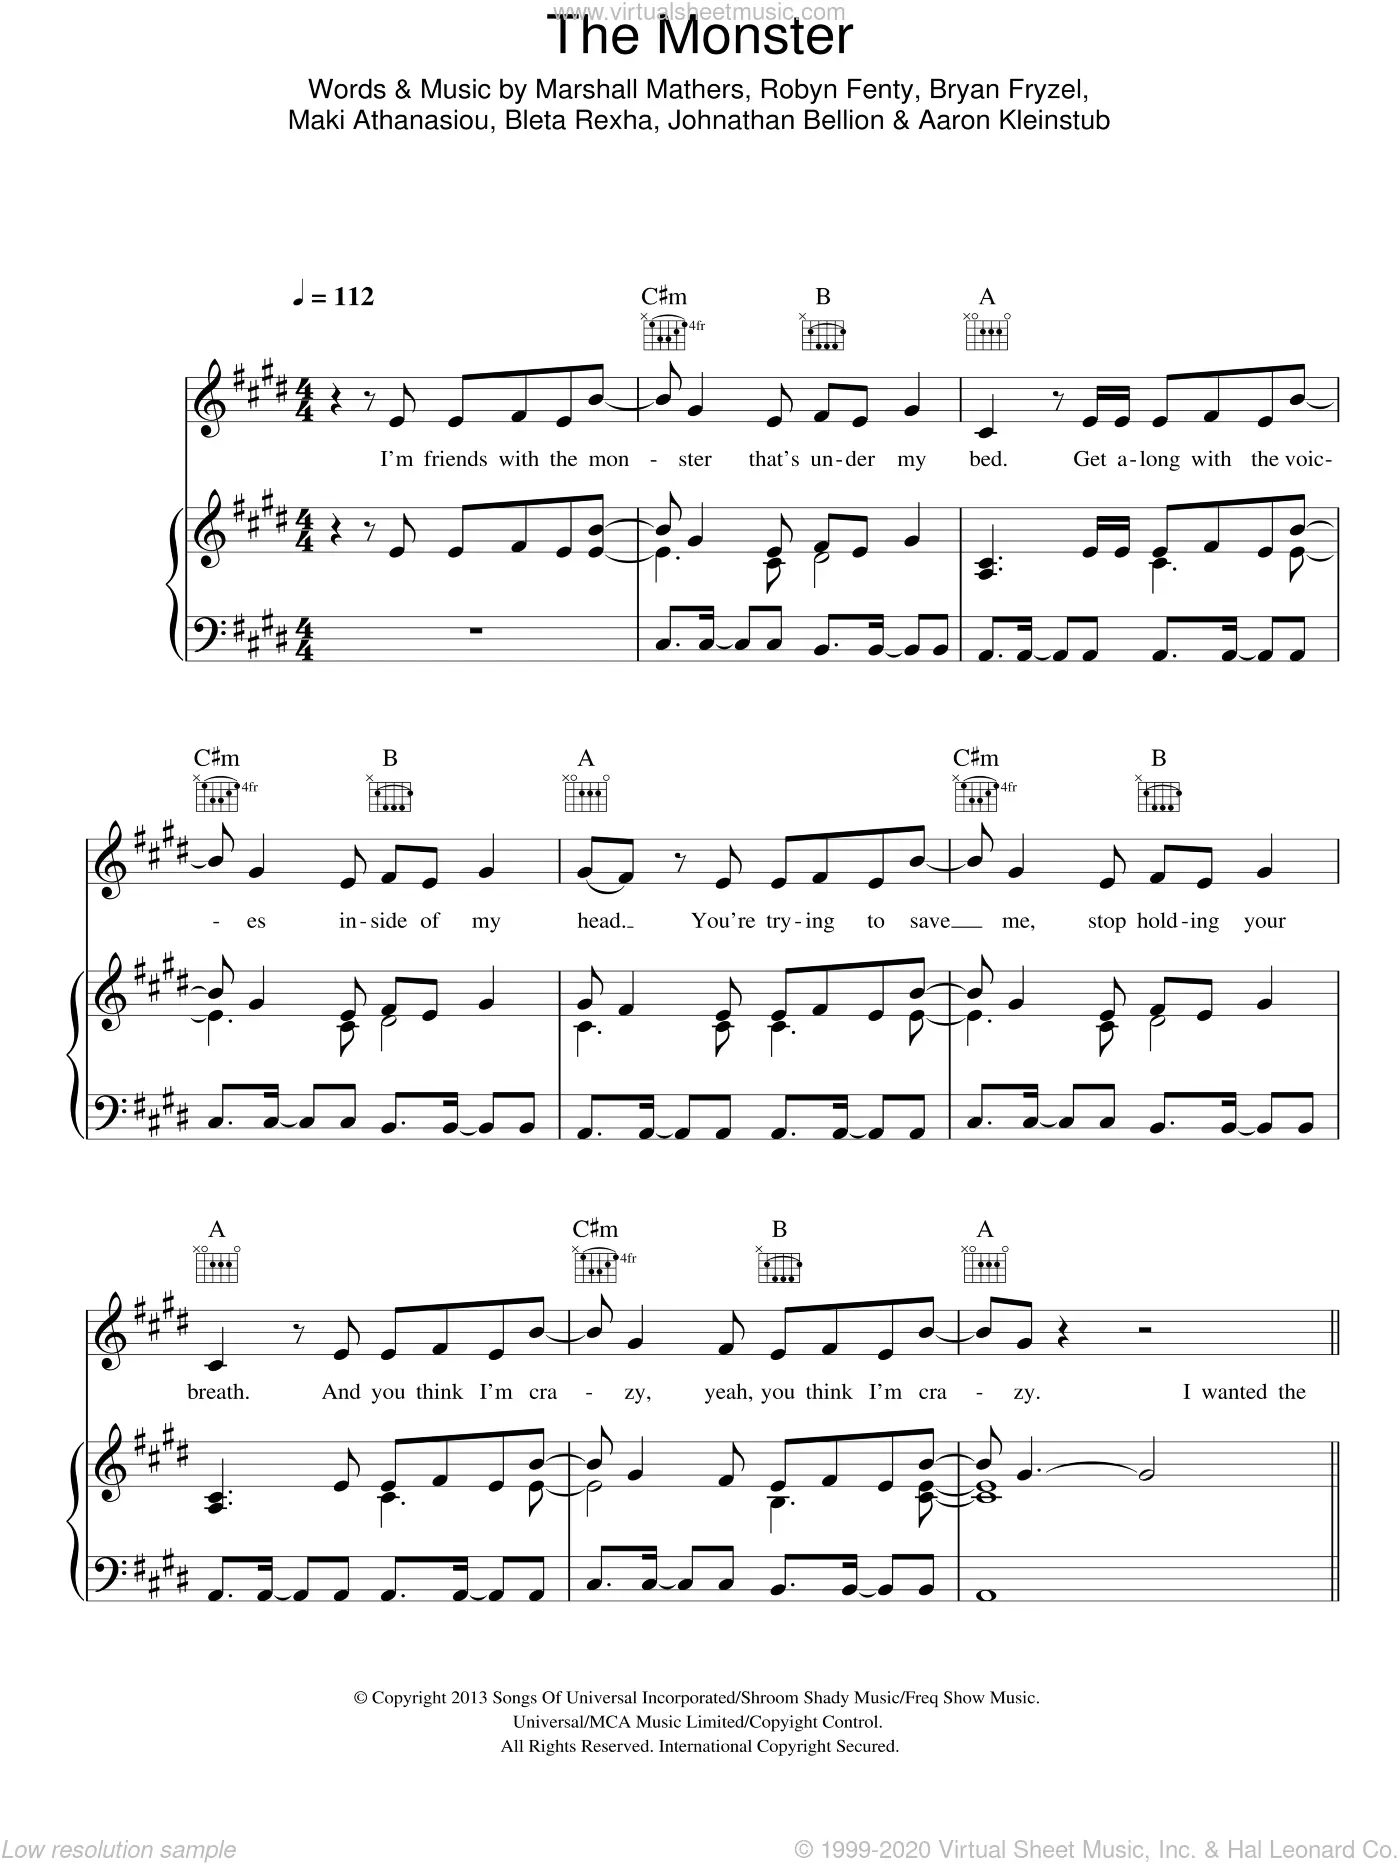 Lose yourself – Eminem (Piano, Theme from 8 Mile) Sheet music for